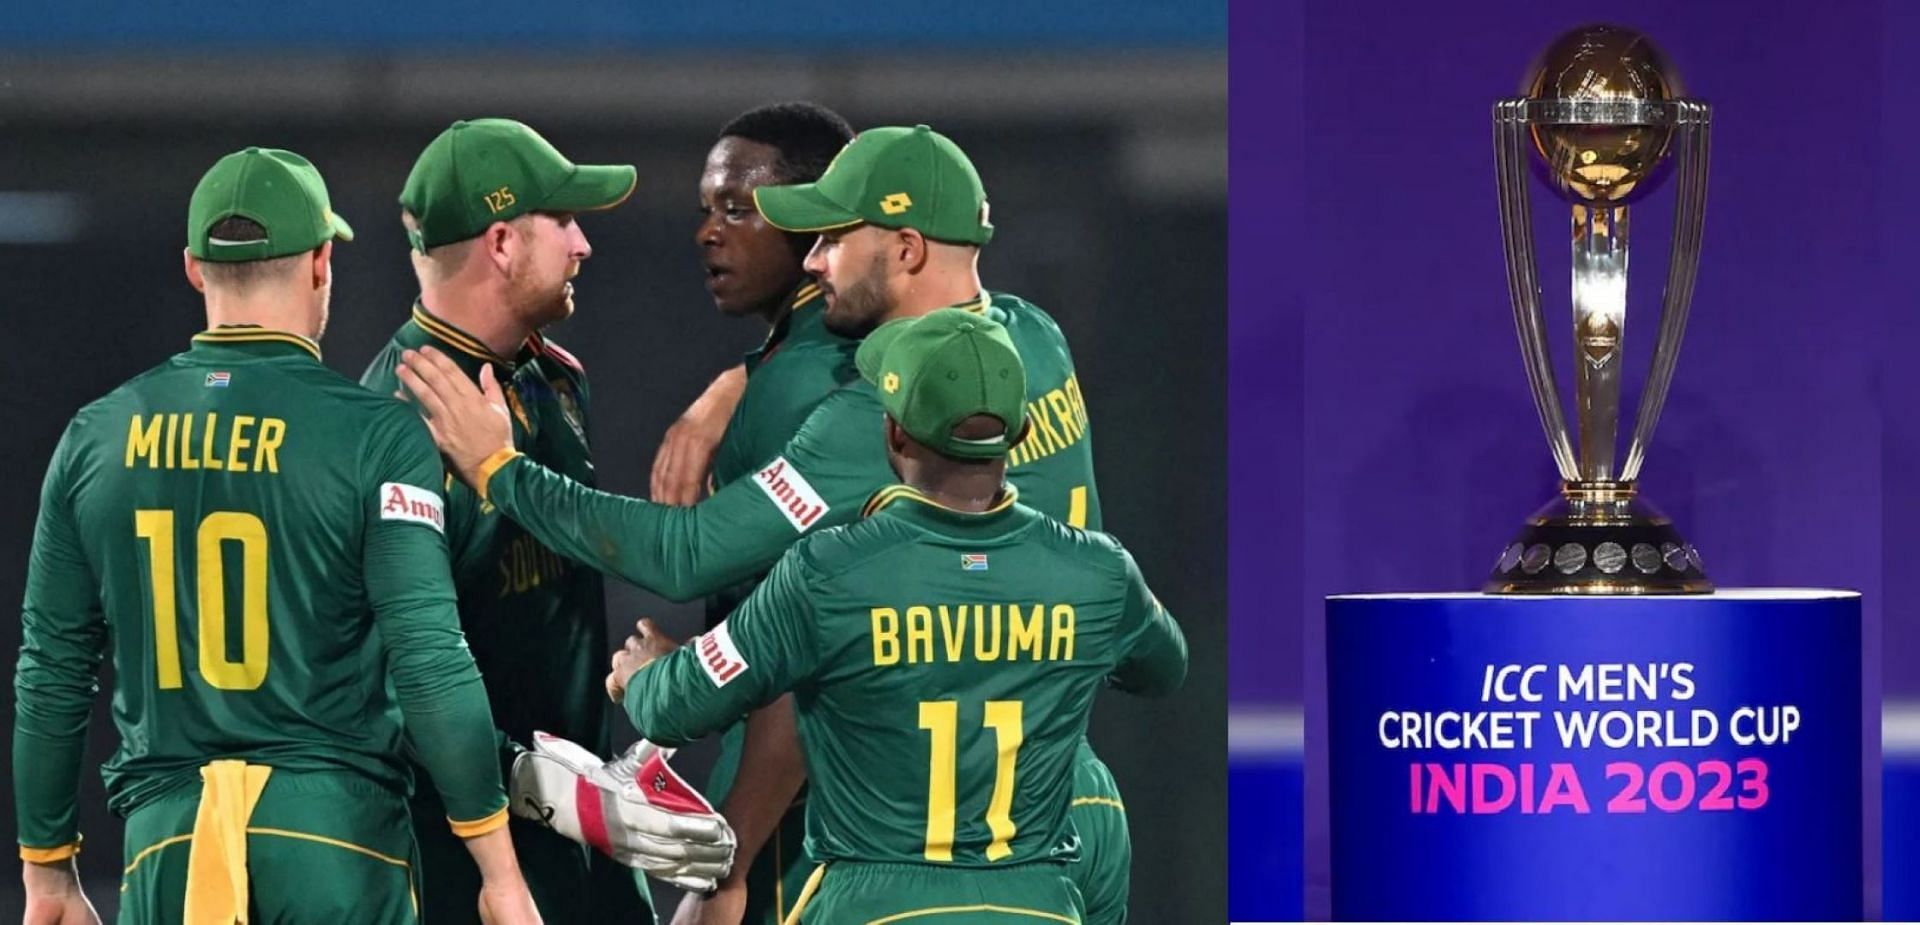 South Africa continues to search for the elusive World Cup title